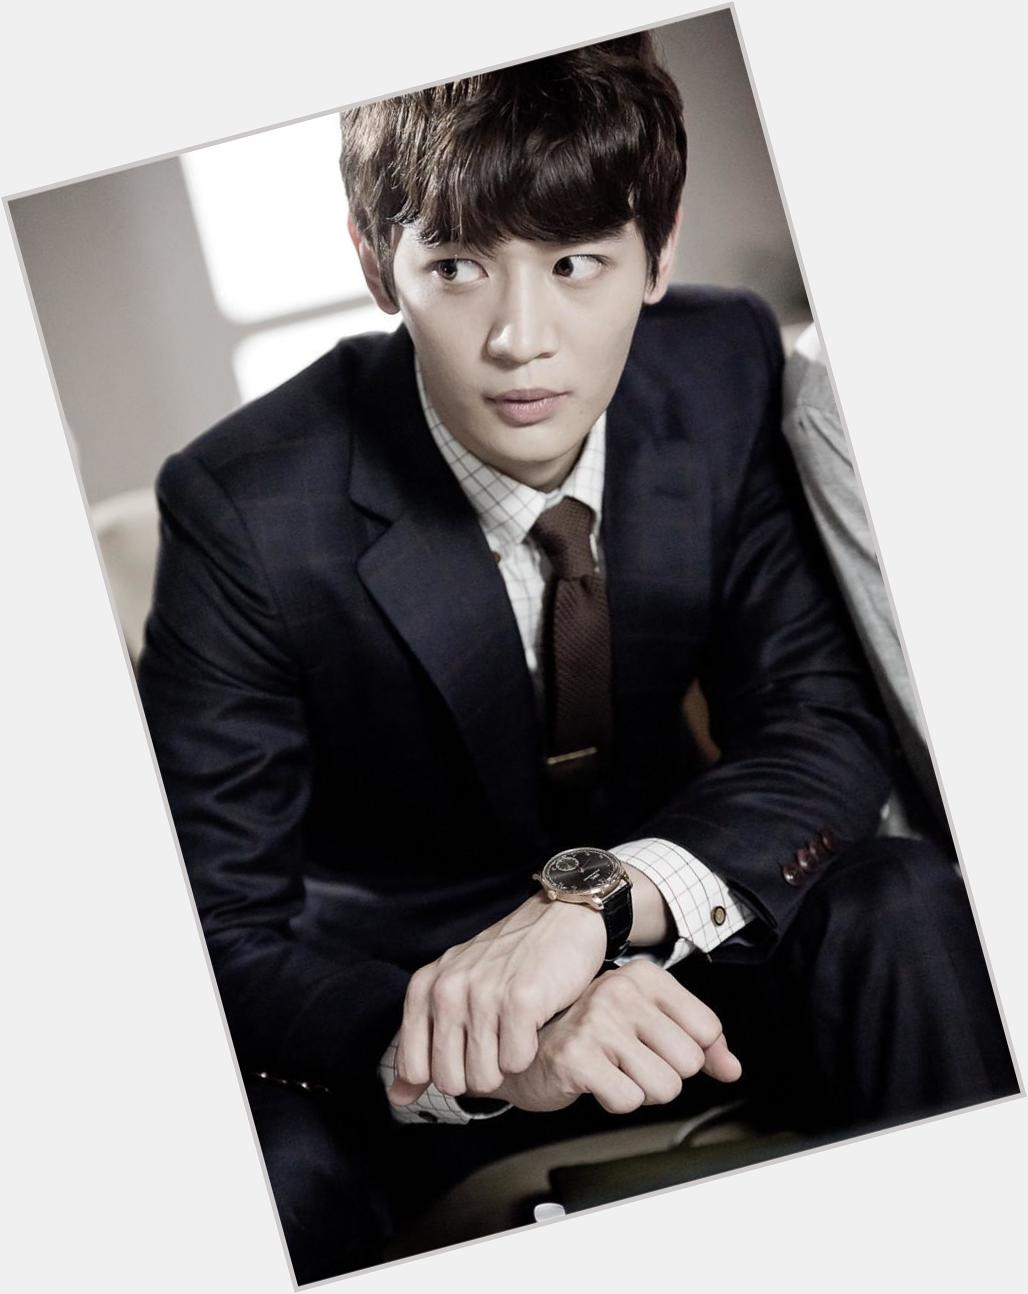 Happy happy birthday Choi Minho! I wish you eternal happiness!Thank you for being an inspiration! We love you baby <3 